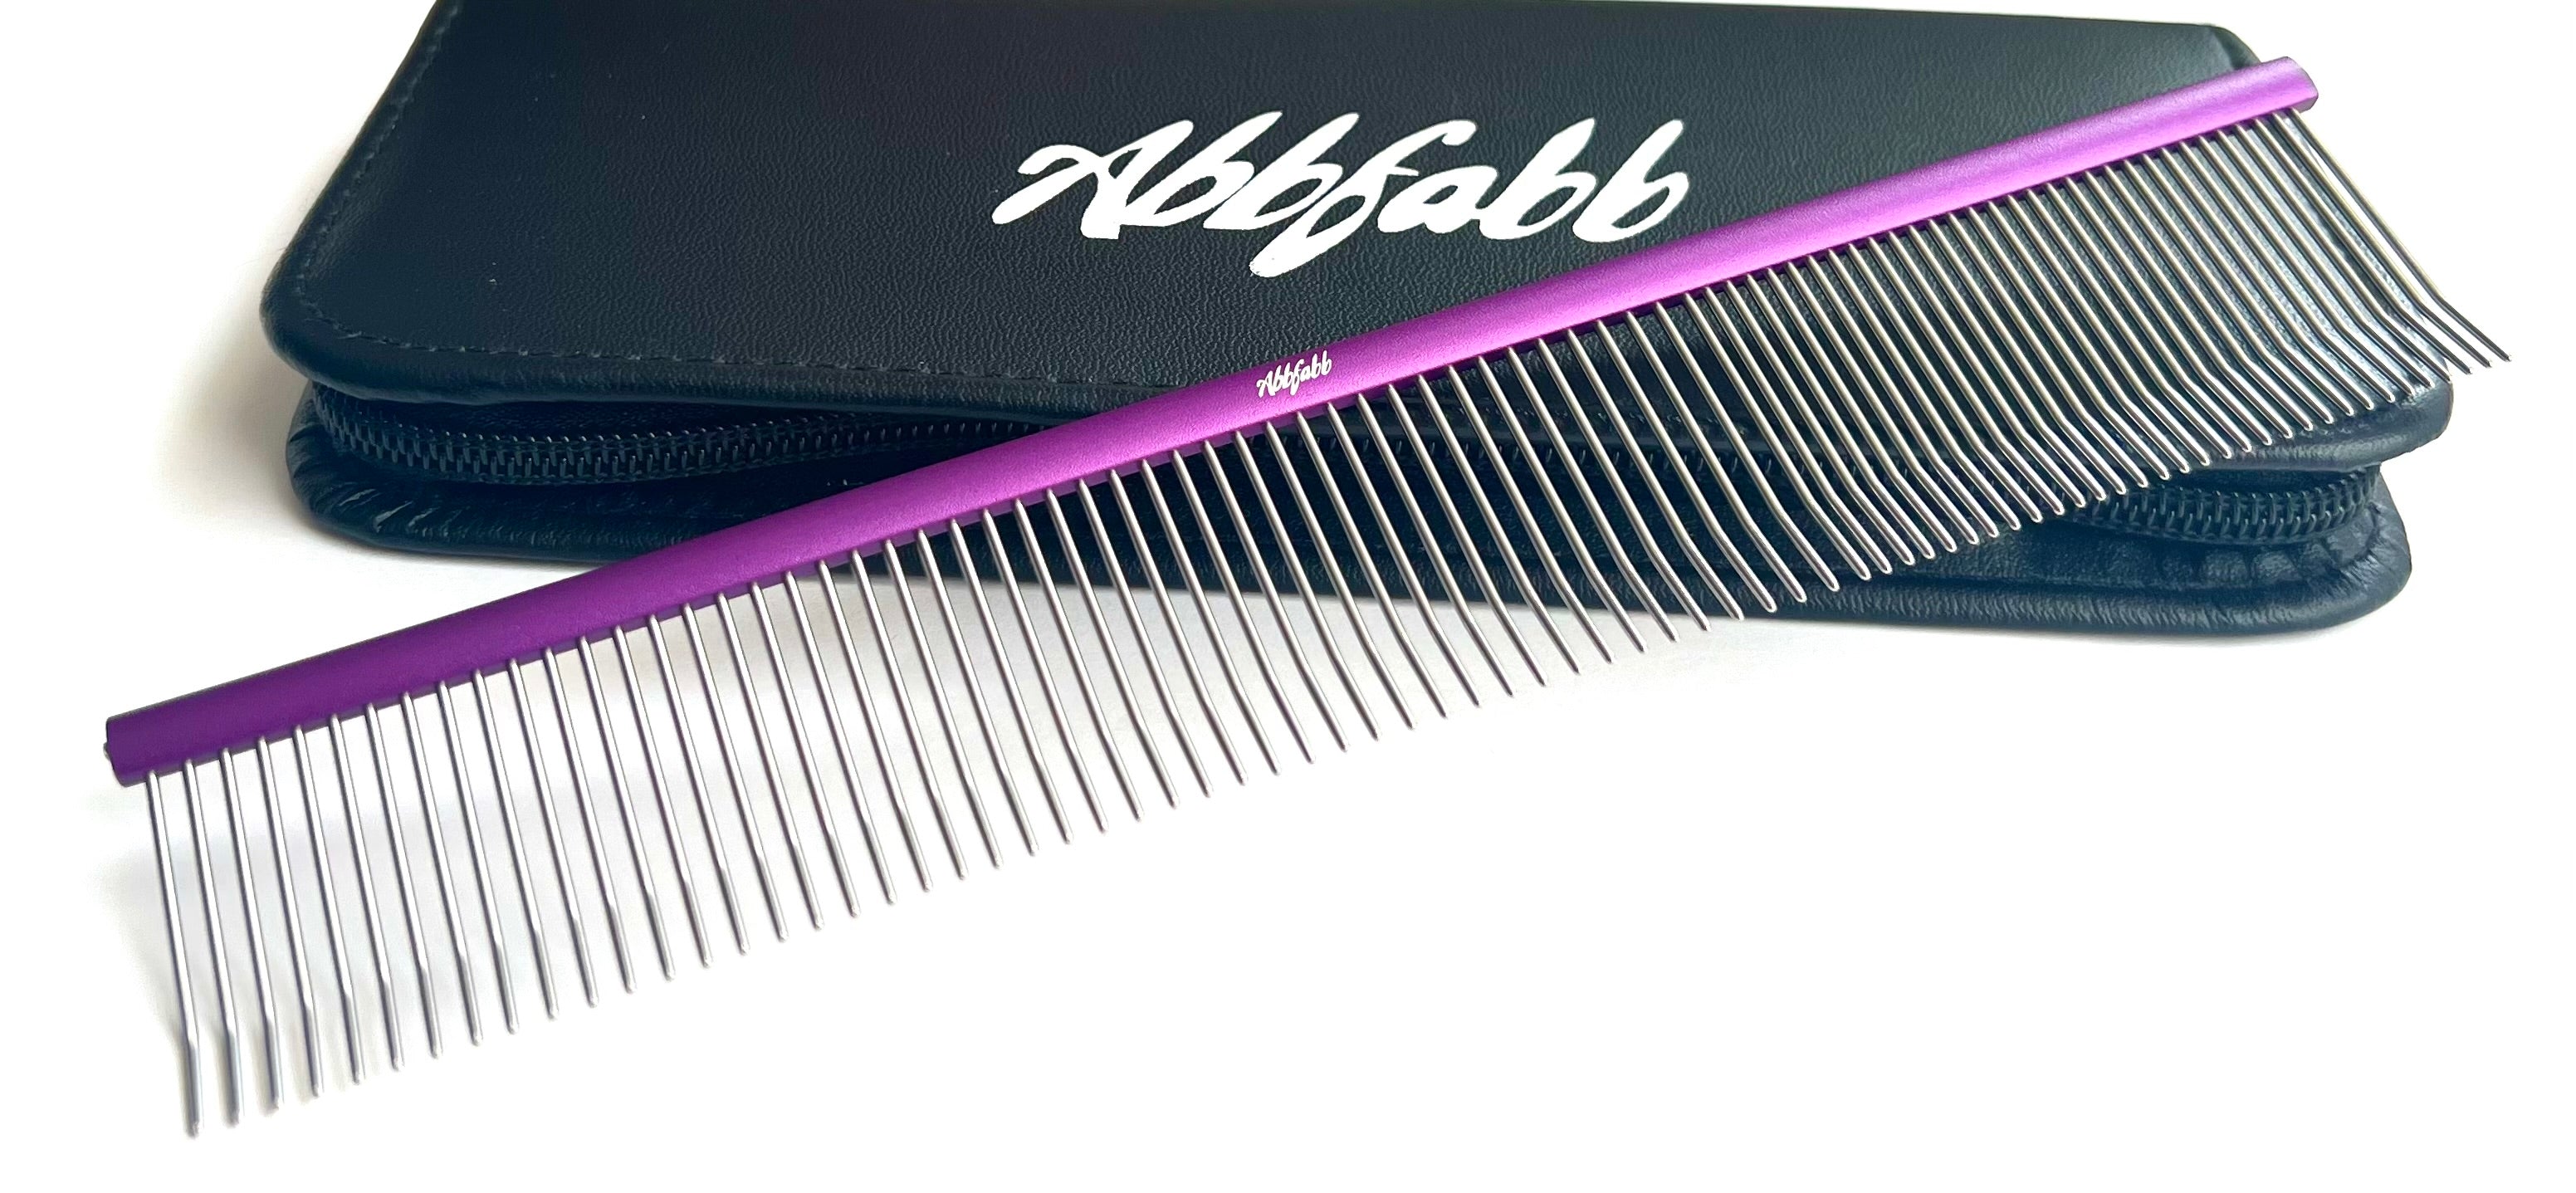 finishing comb for dog grooming by Abbfabb Grooming Scissors